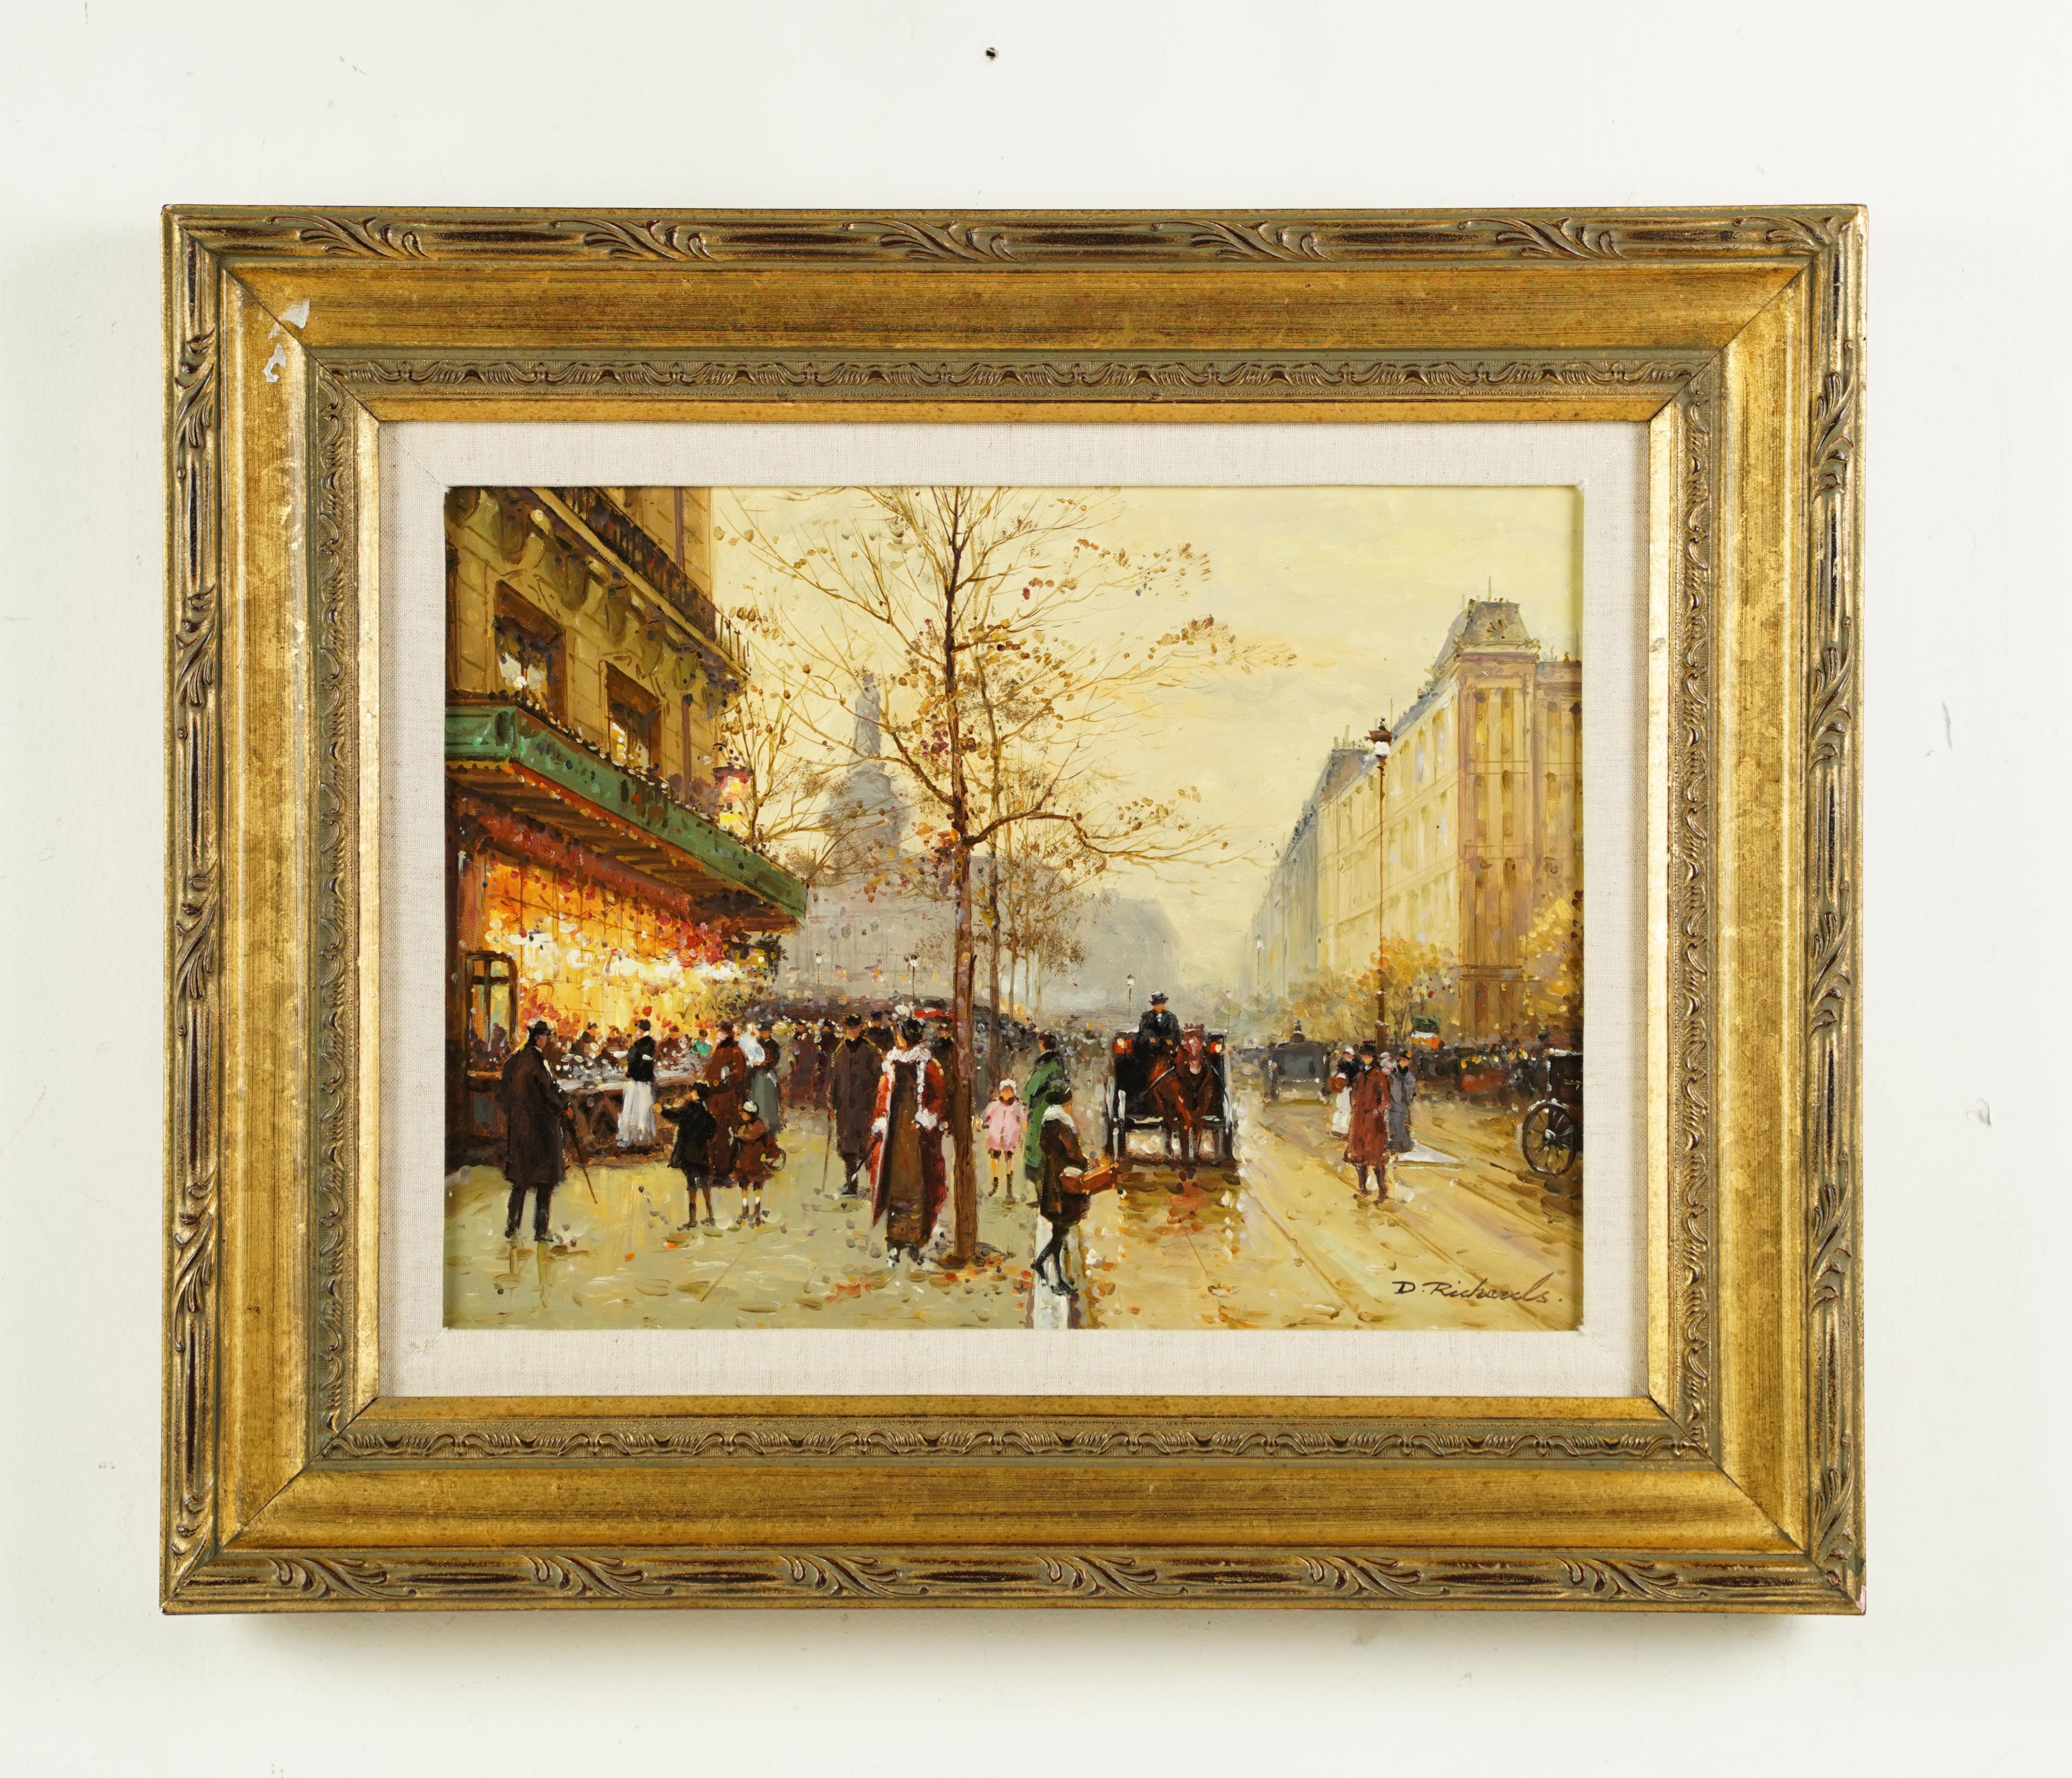 French impressionsit street scene oil painting.  Oil on canvas. Framed.  Signed.  Image size, 16L x 12H.